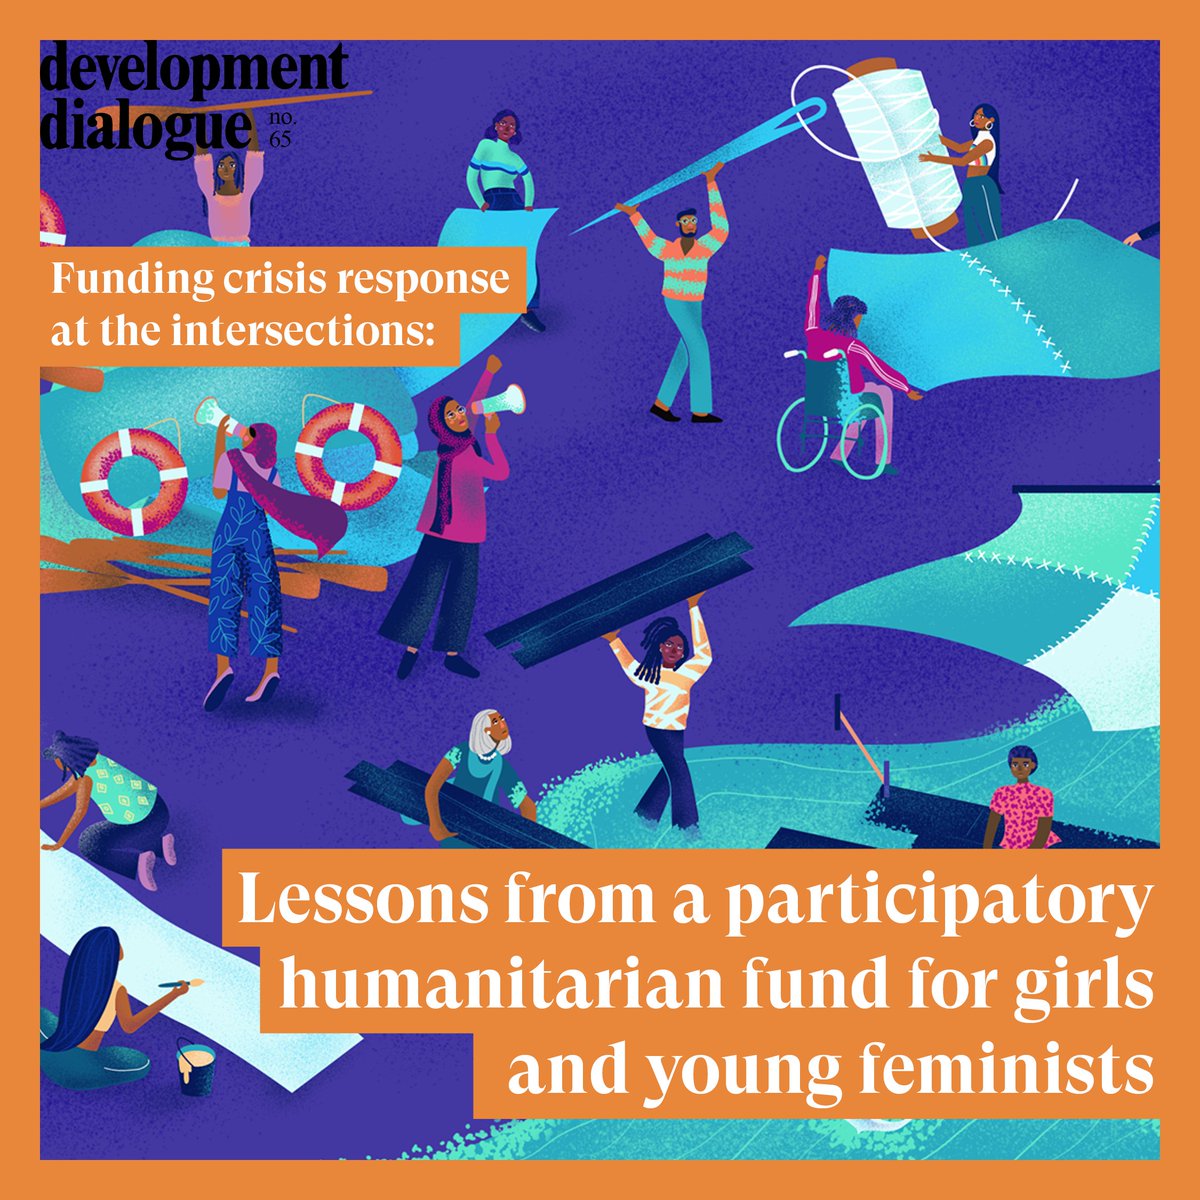 For #WomensDay24 we wish to highlight this article from @Purposeful_org on how to #InvestInWomen during times of crisis, such as the #COVID19 Read it here: daghammarskjold.se/wp-content/upl… #IWD #Feminism #8march #DDVolume